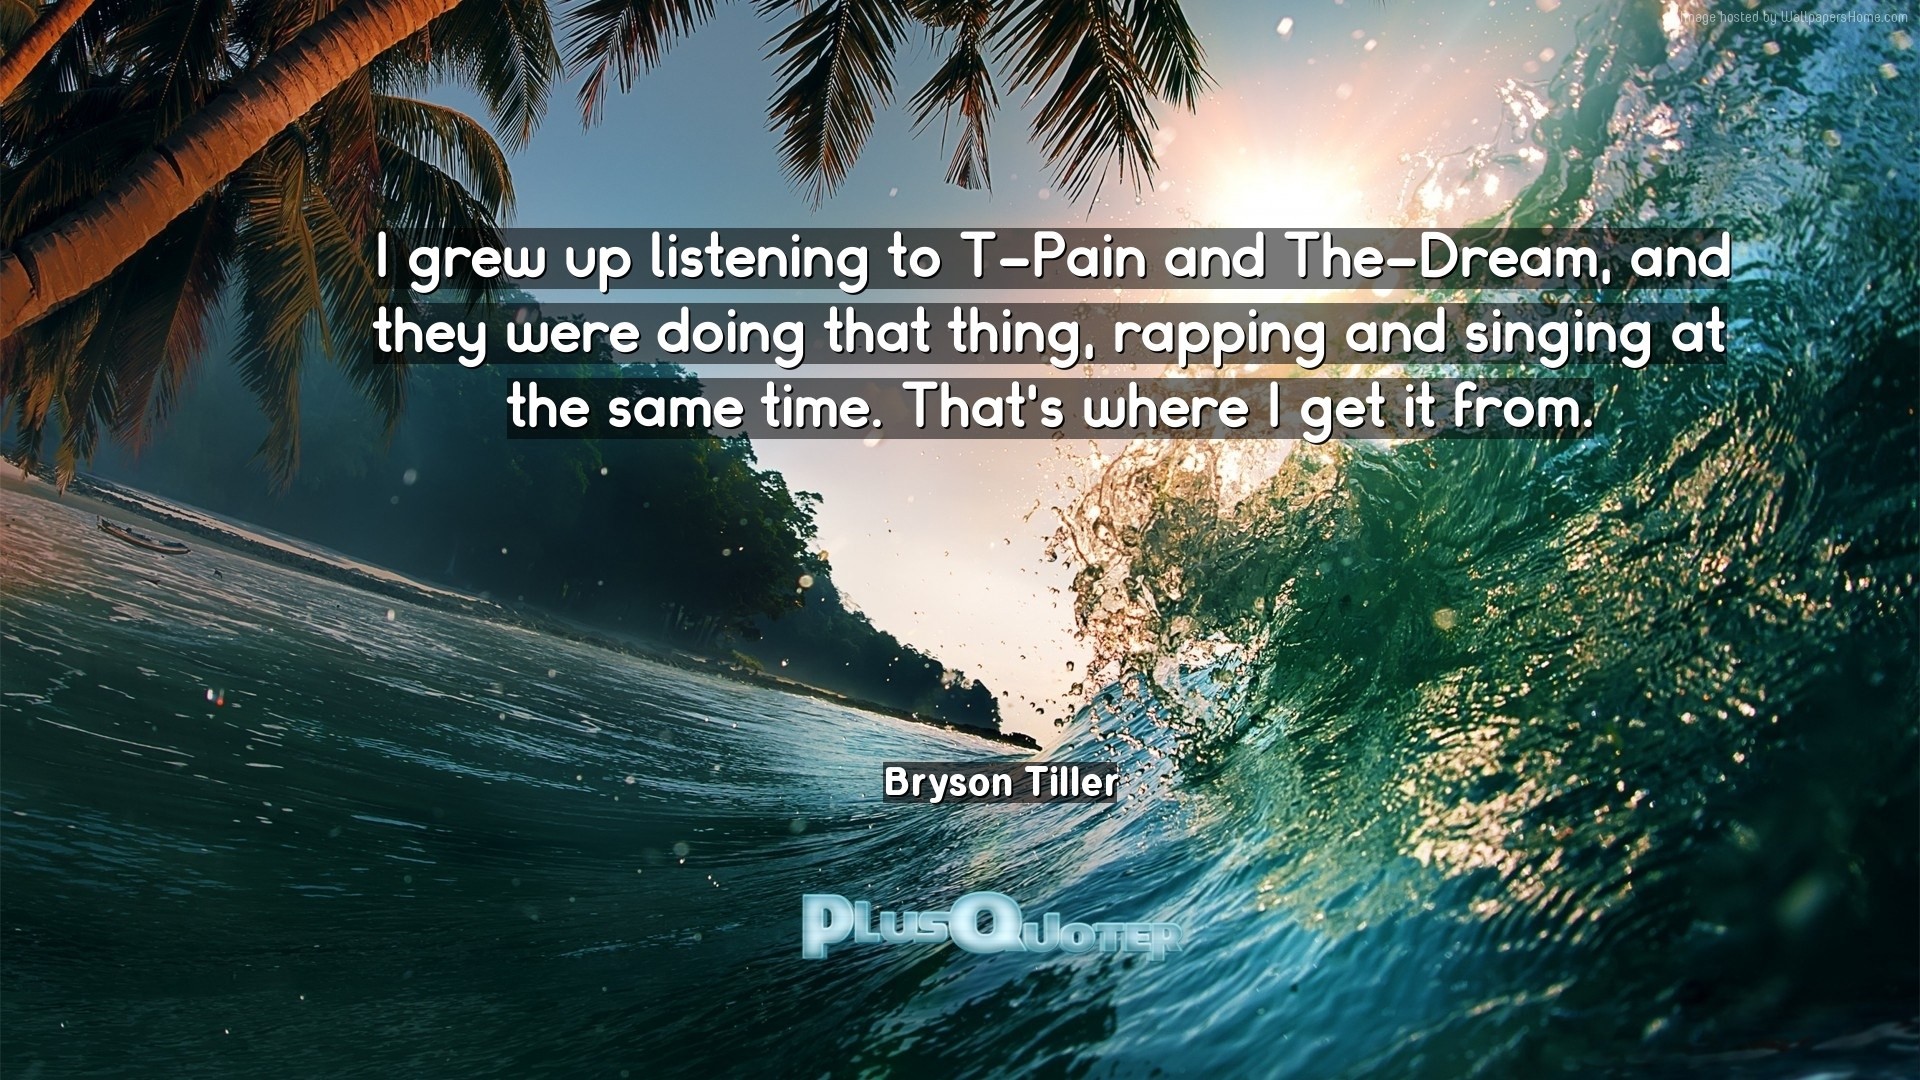 1920x1080 Download Wallpaper with inspirational Quotes- "I grew up listening to  T-Pain and